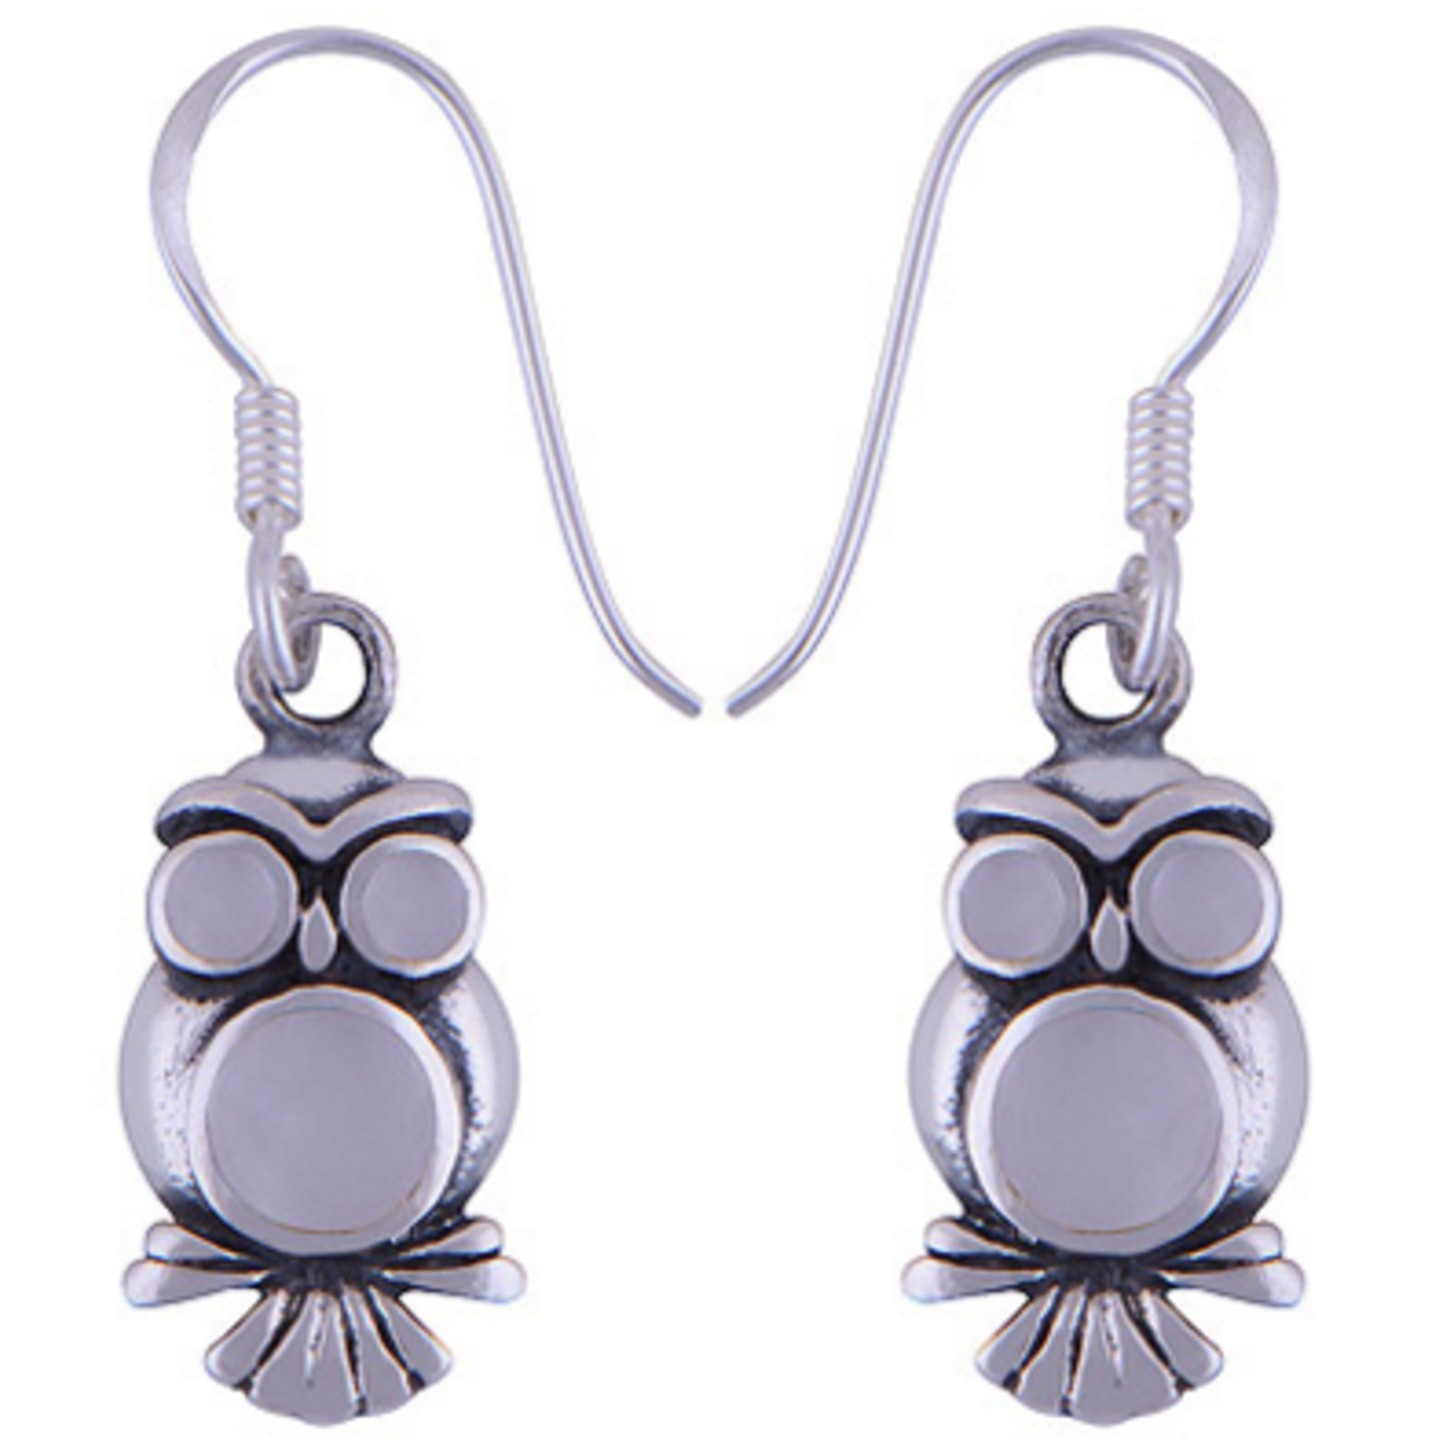 The Snow Owl Silver Earring